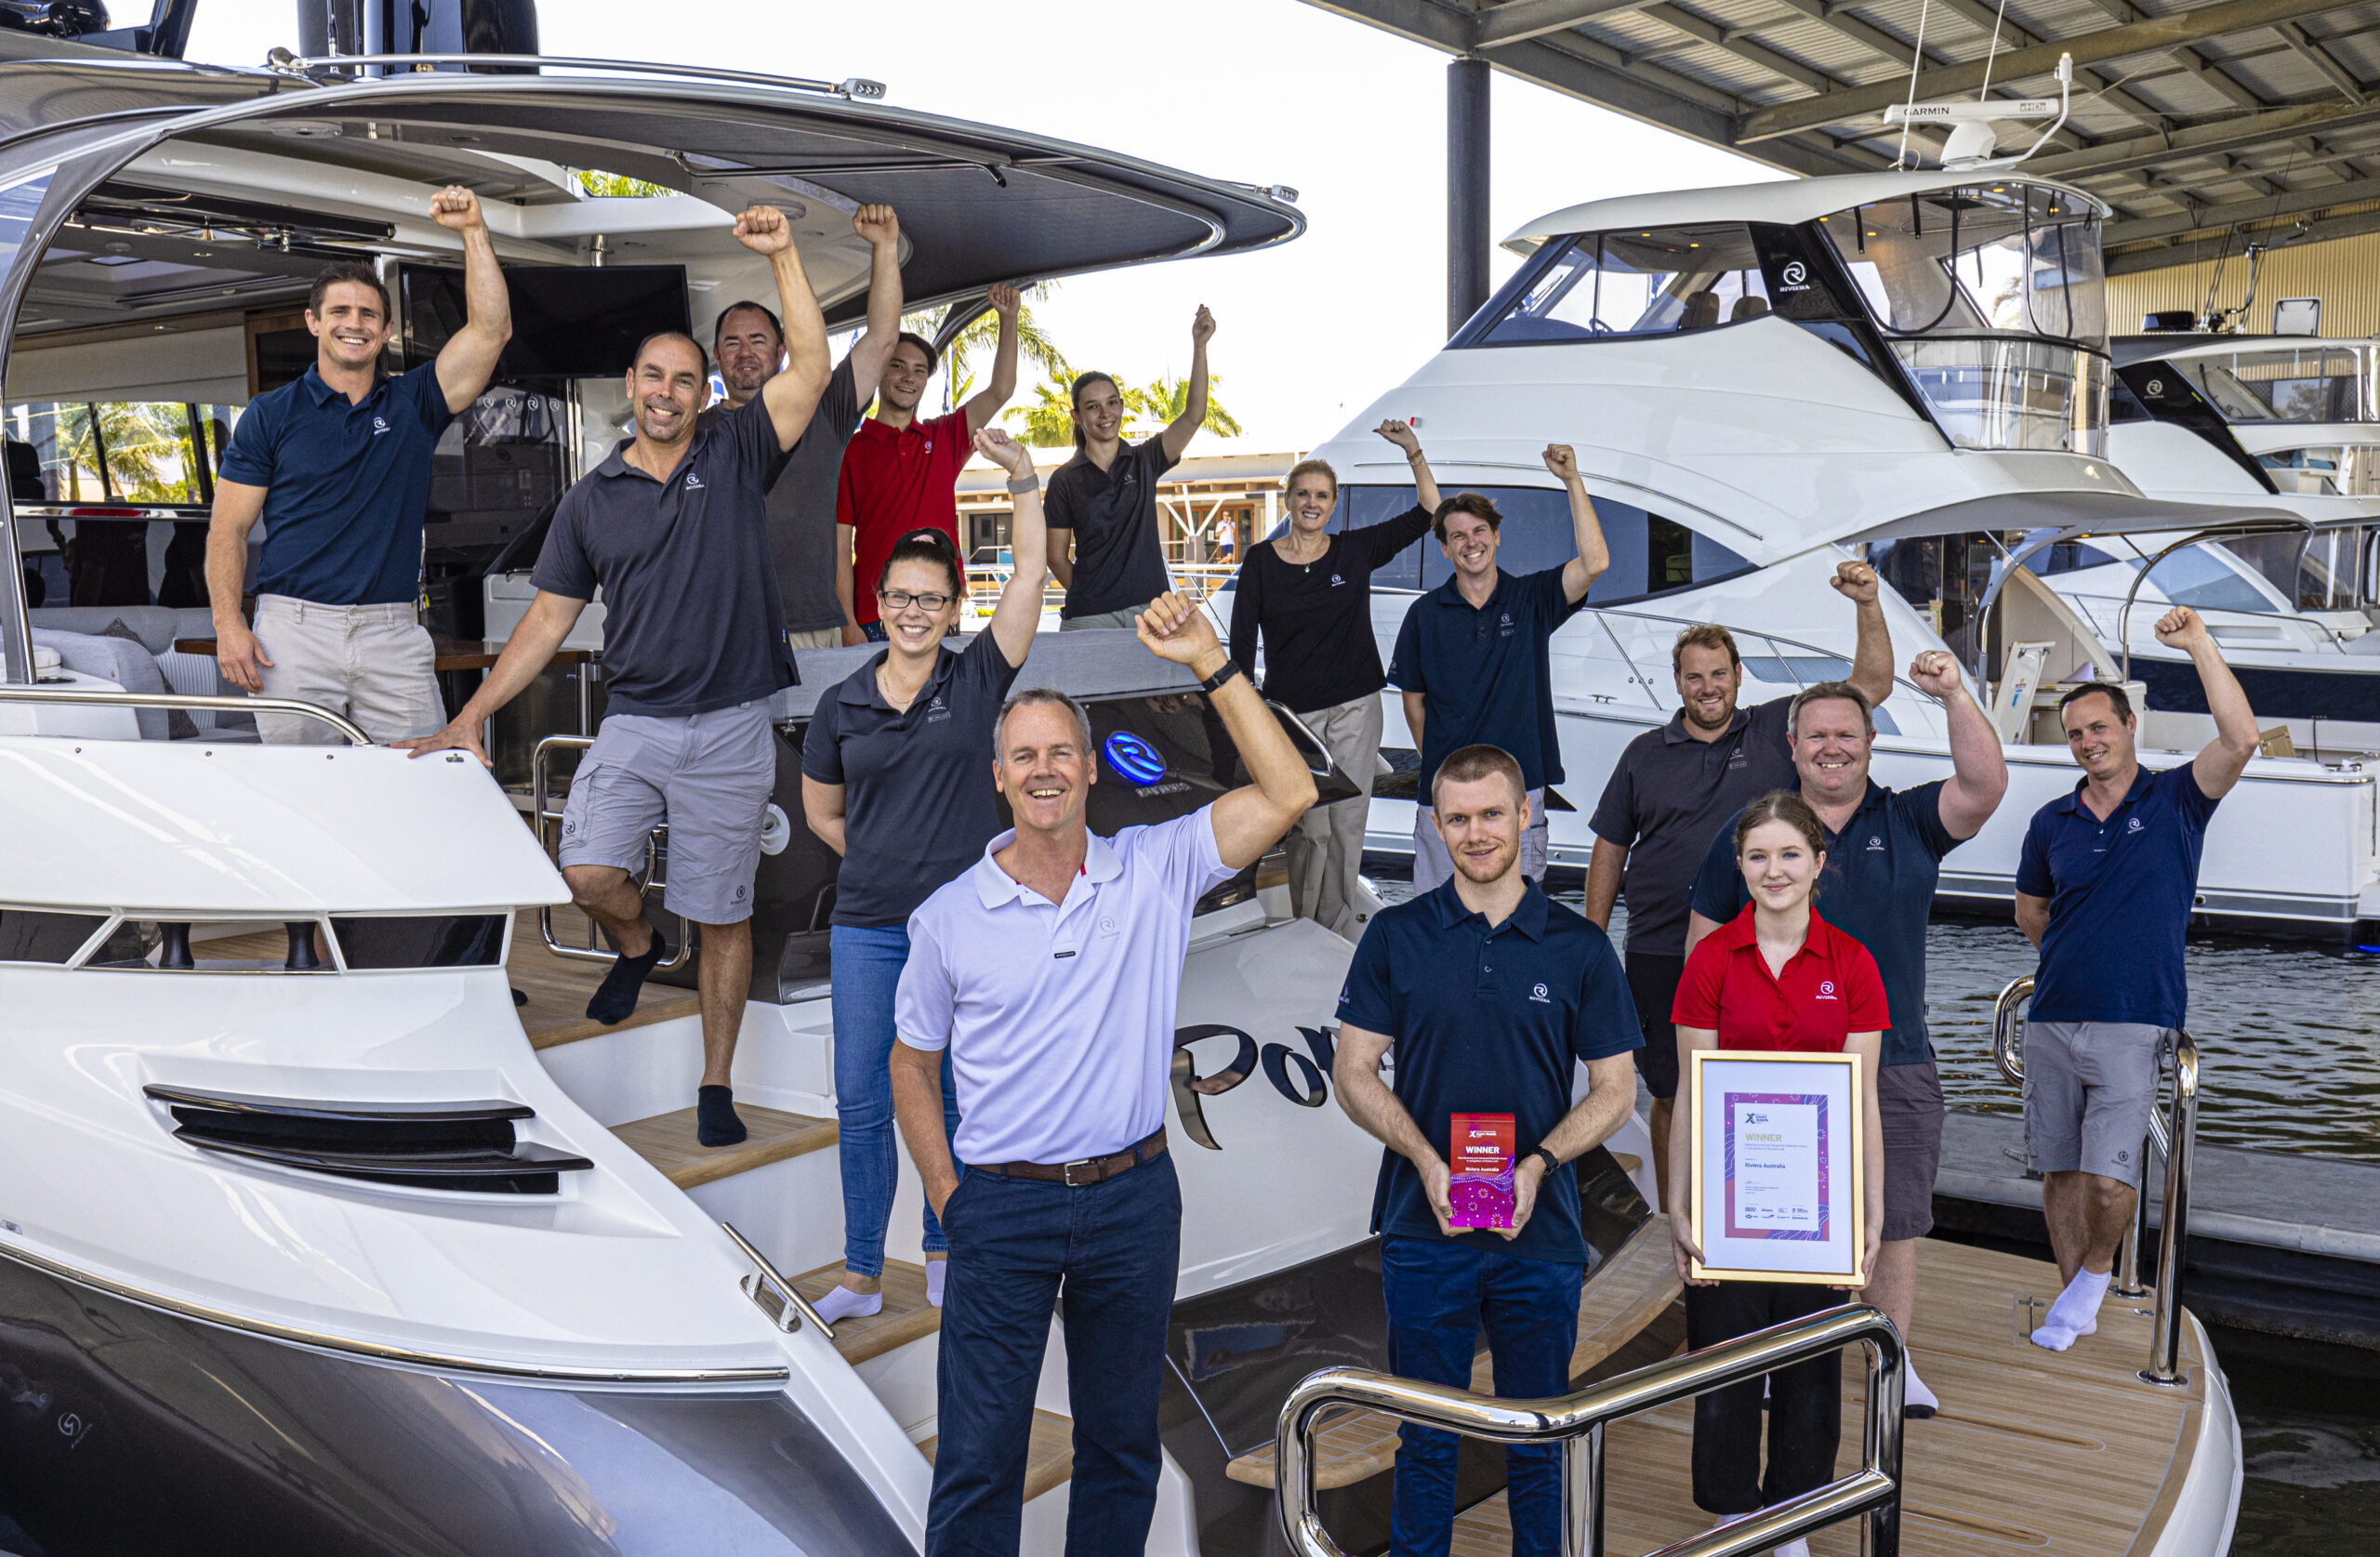 Riviera team celebrating their Export award on the aft of a Riviera vessel